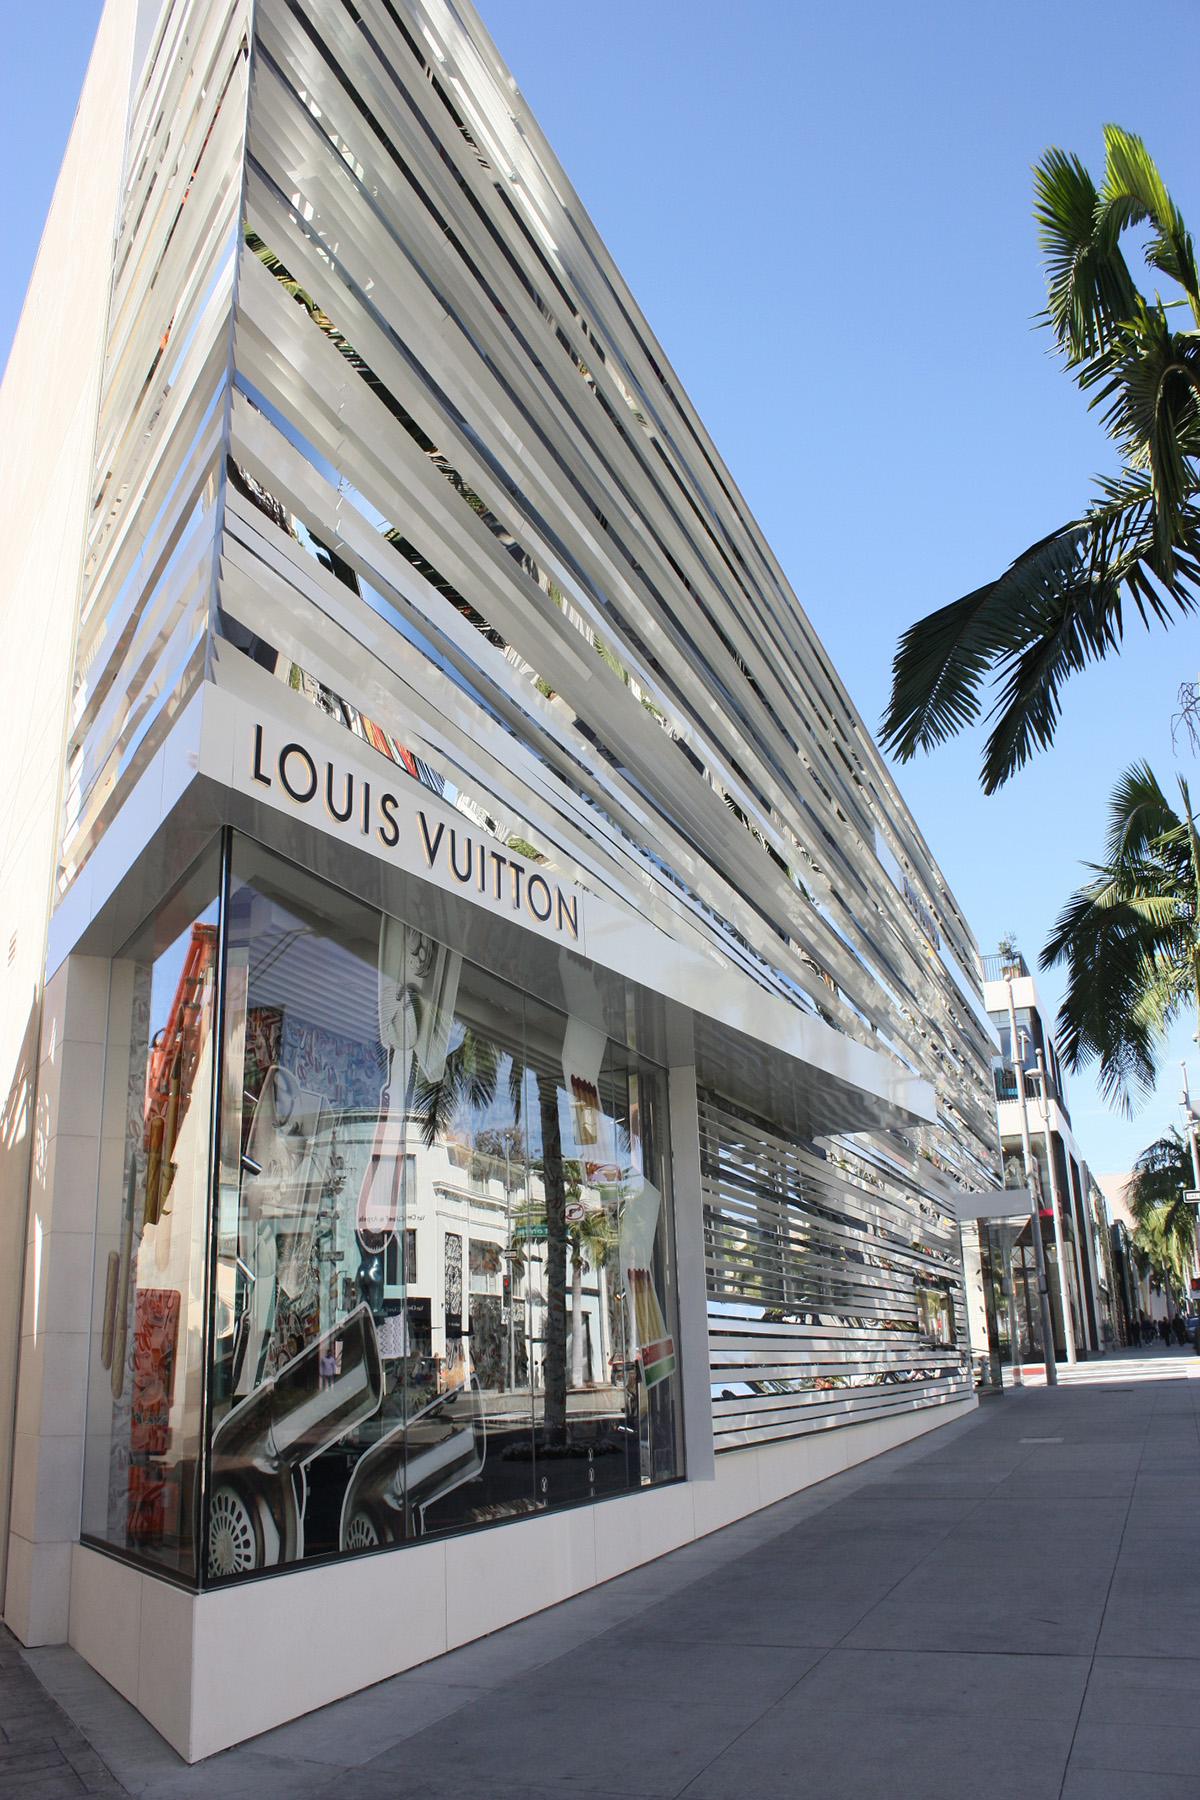 Louis Vuitton's Flagship Store At The Corner Of Rodeo Drive And Dayton Way  In Beverly Hills Designed By Peter Marino. Stock Photo, Picture and Royalty  Free Image. Image 111373449.